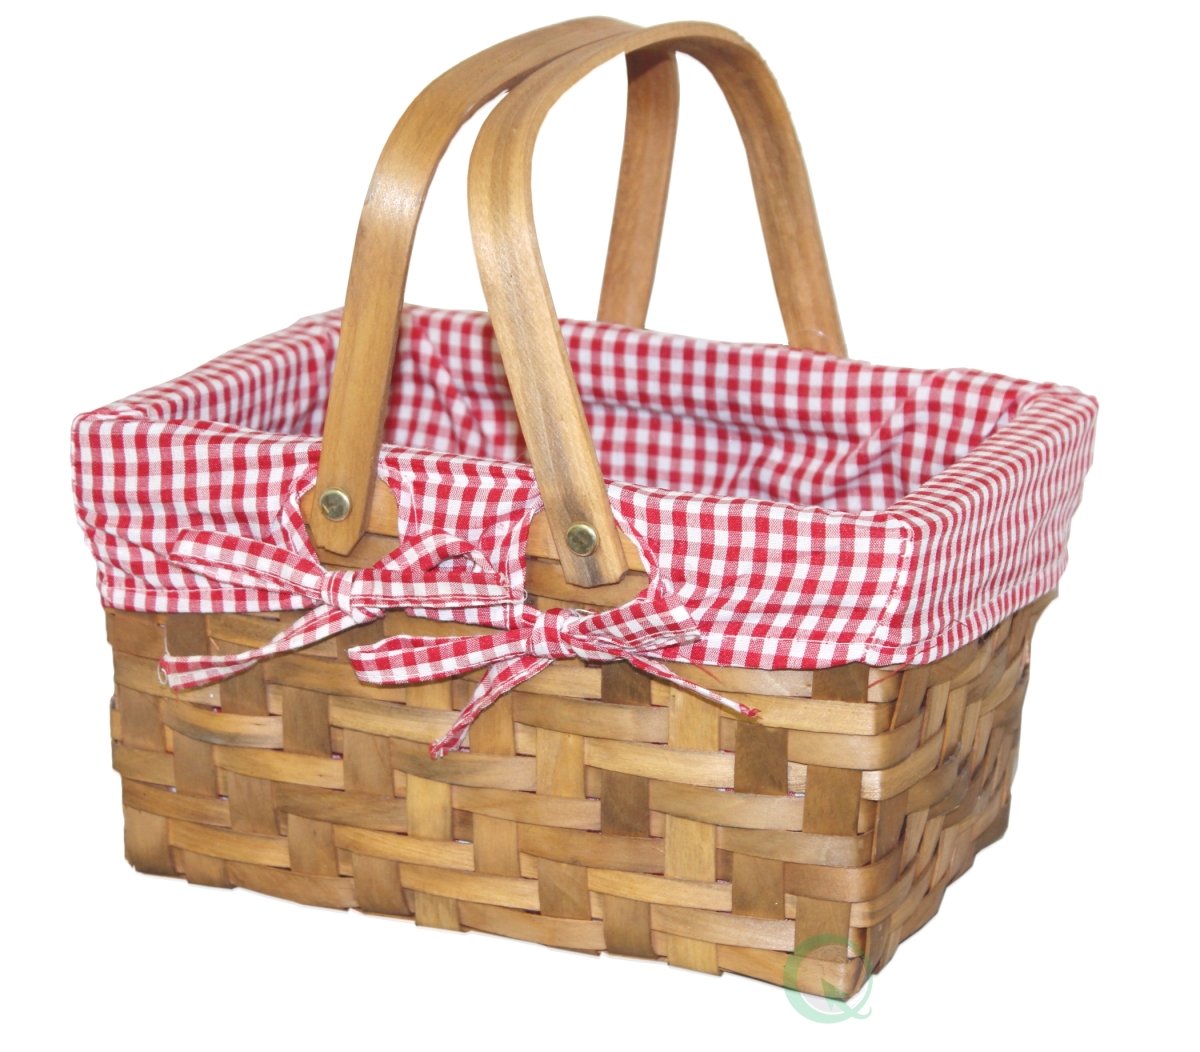 Picture of Vintiquewise QI003085x36 5.5 x 10.2 x 7.7 in. Vintiquewise Rectangular Basket Lined with Gingham Lining, Brown - Small